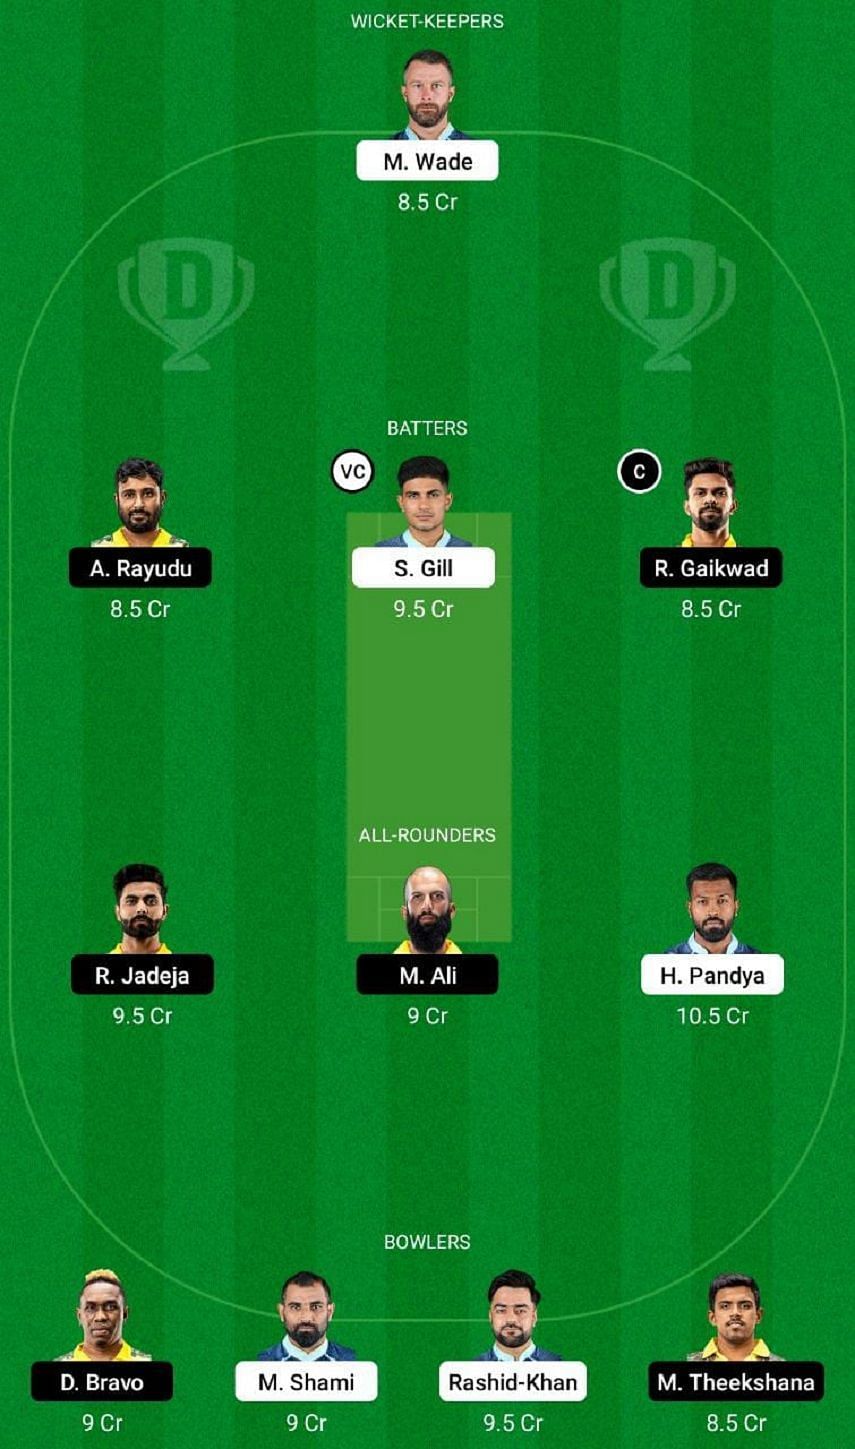 Gt Vs Csk Dream11 Prediction Fantasy Cricket Tips Todays Playing 11 And Pitch Report For Ipl 